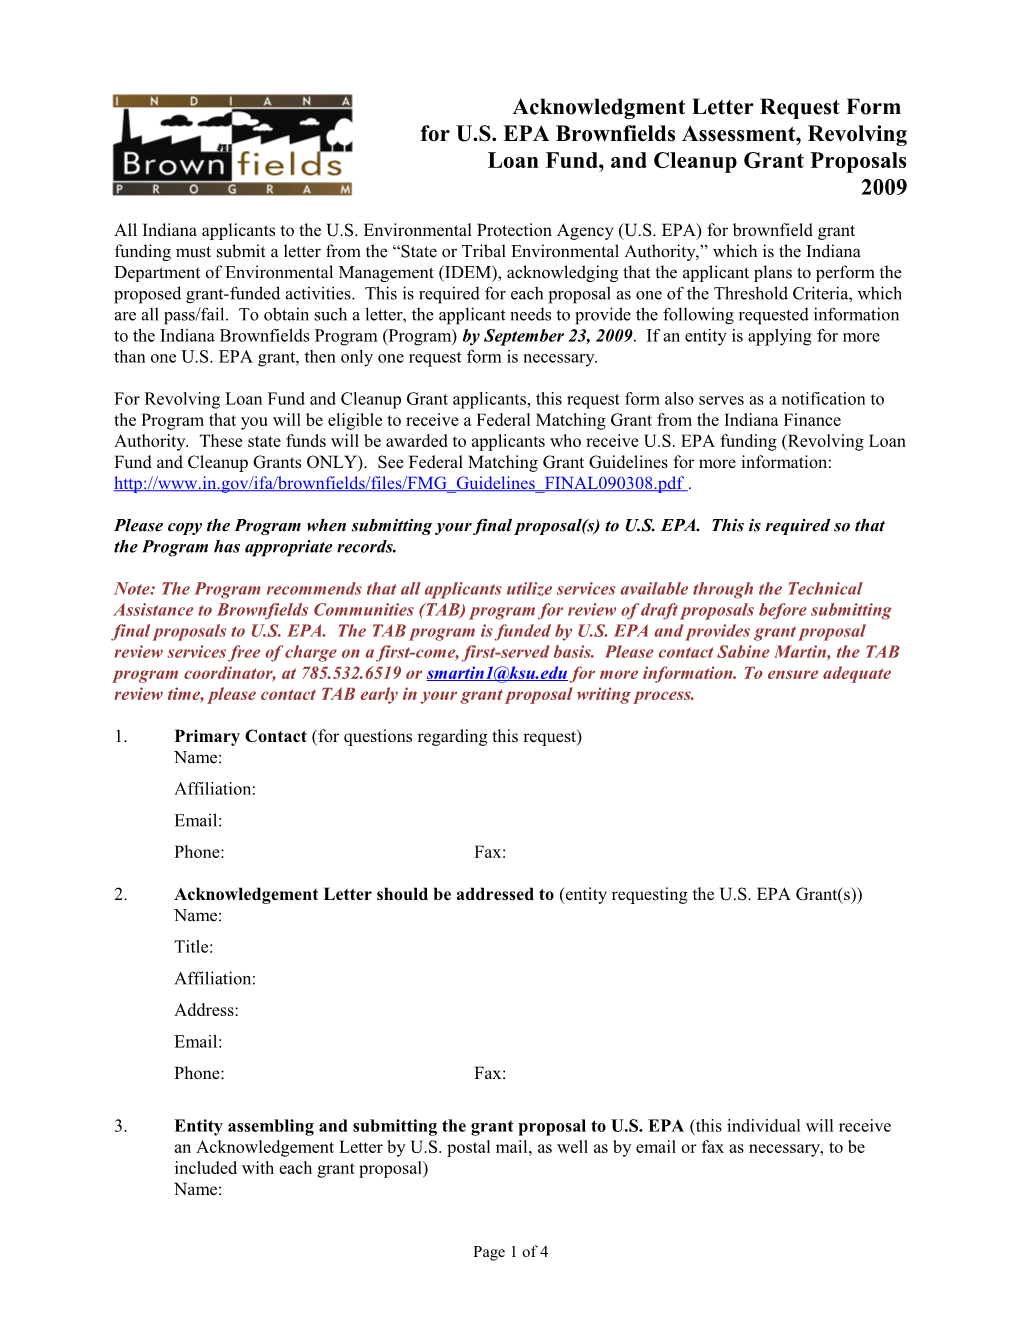 How to Obtain an IDEM Brownfields Program Letter of Support